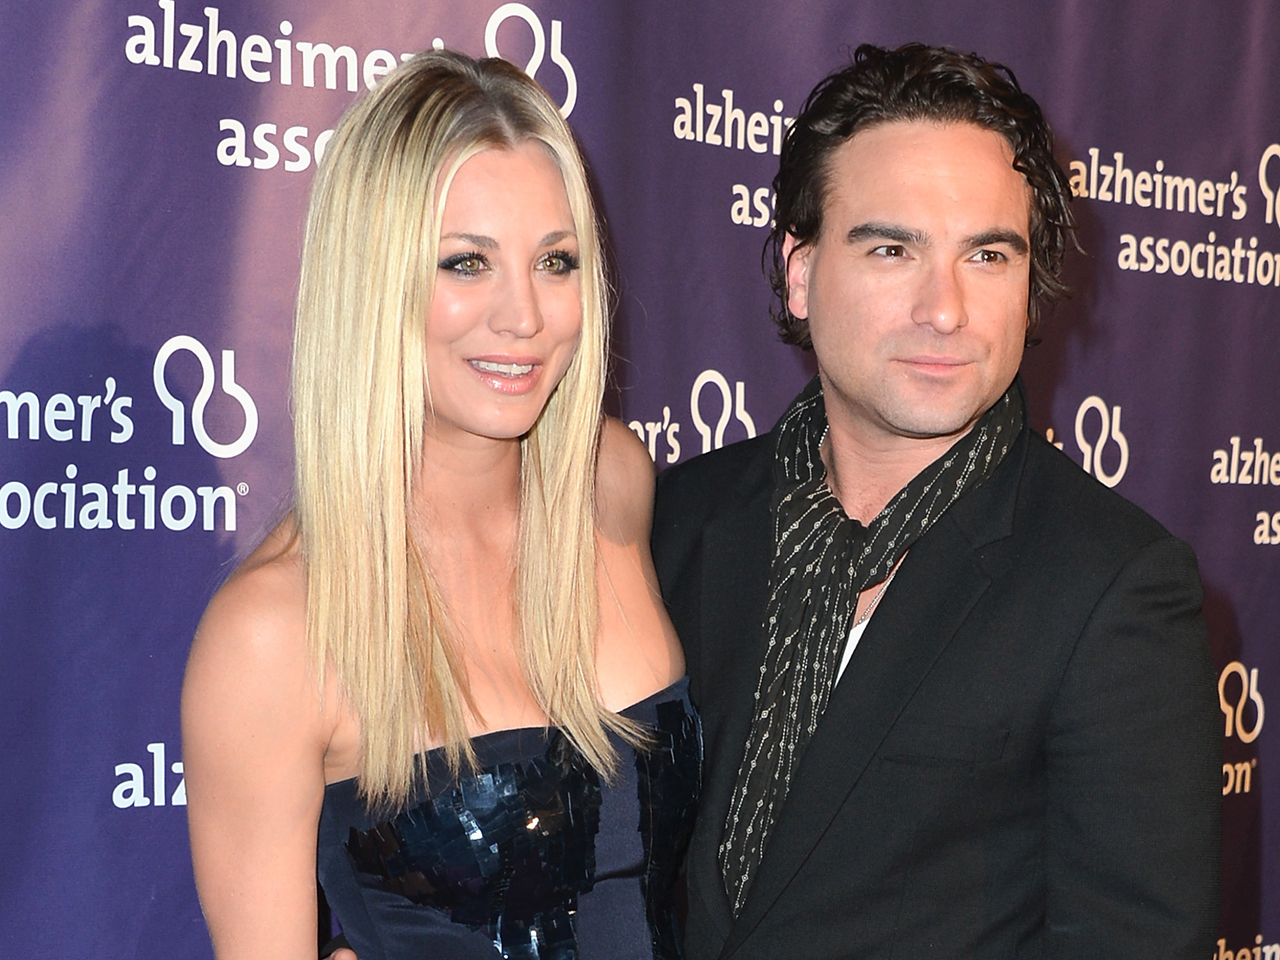 'Big Bang Theory's' Johnny Galecki opens up about secret relationship with Kaley Cuoco - TODAY.com